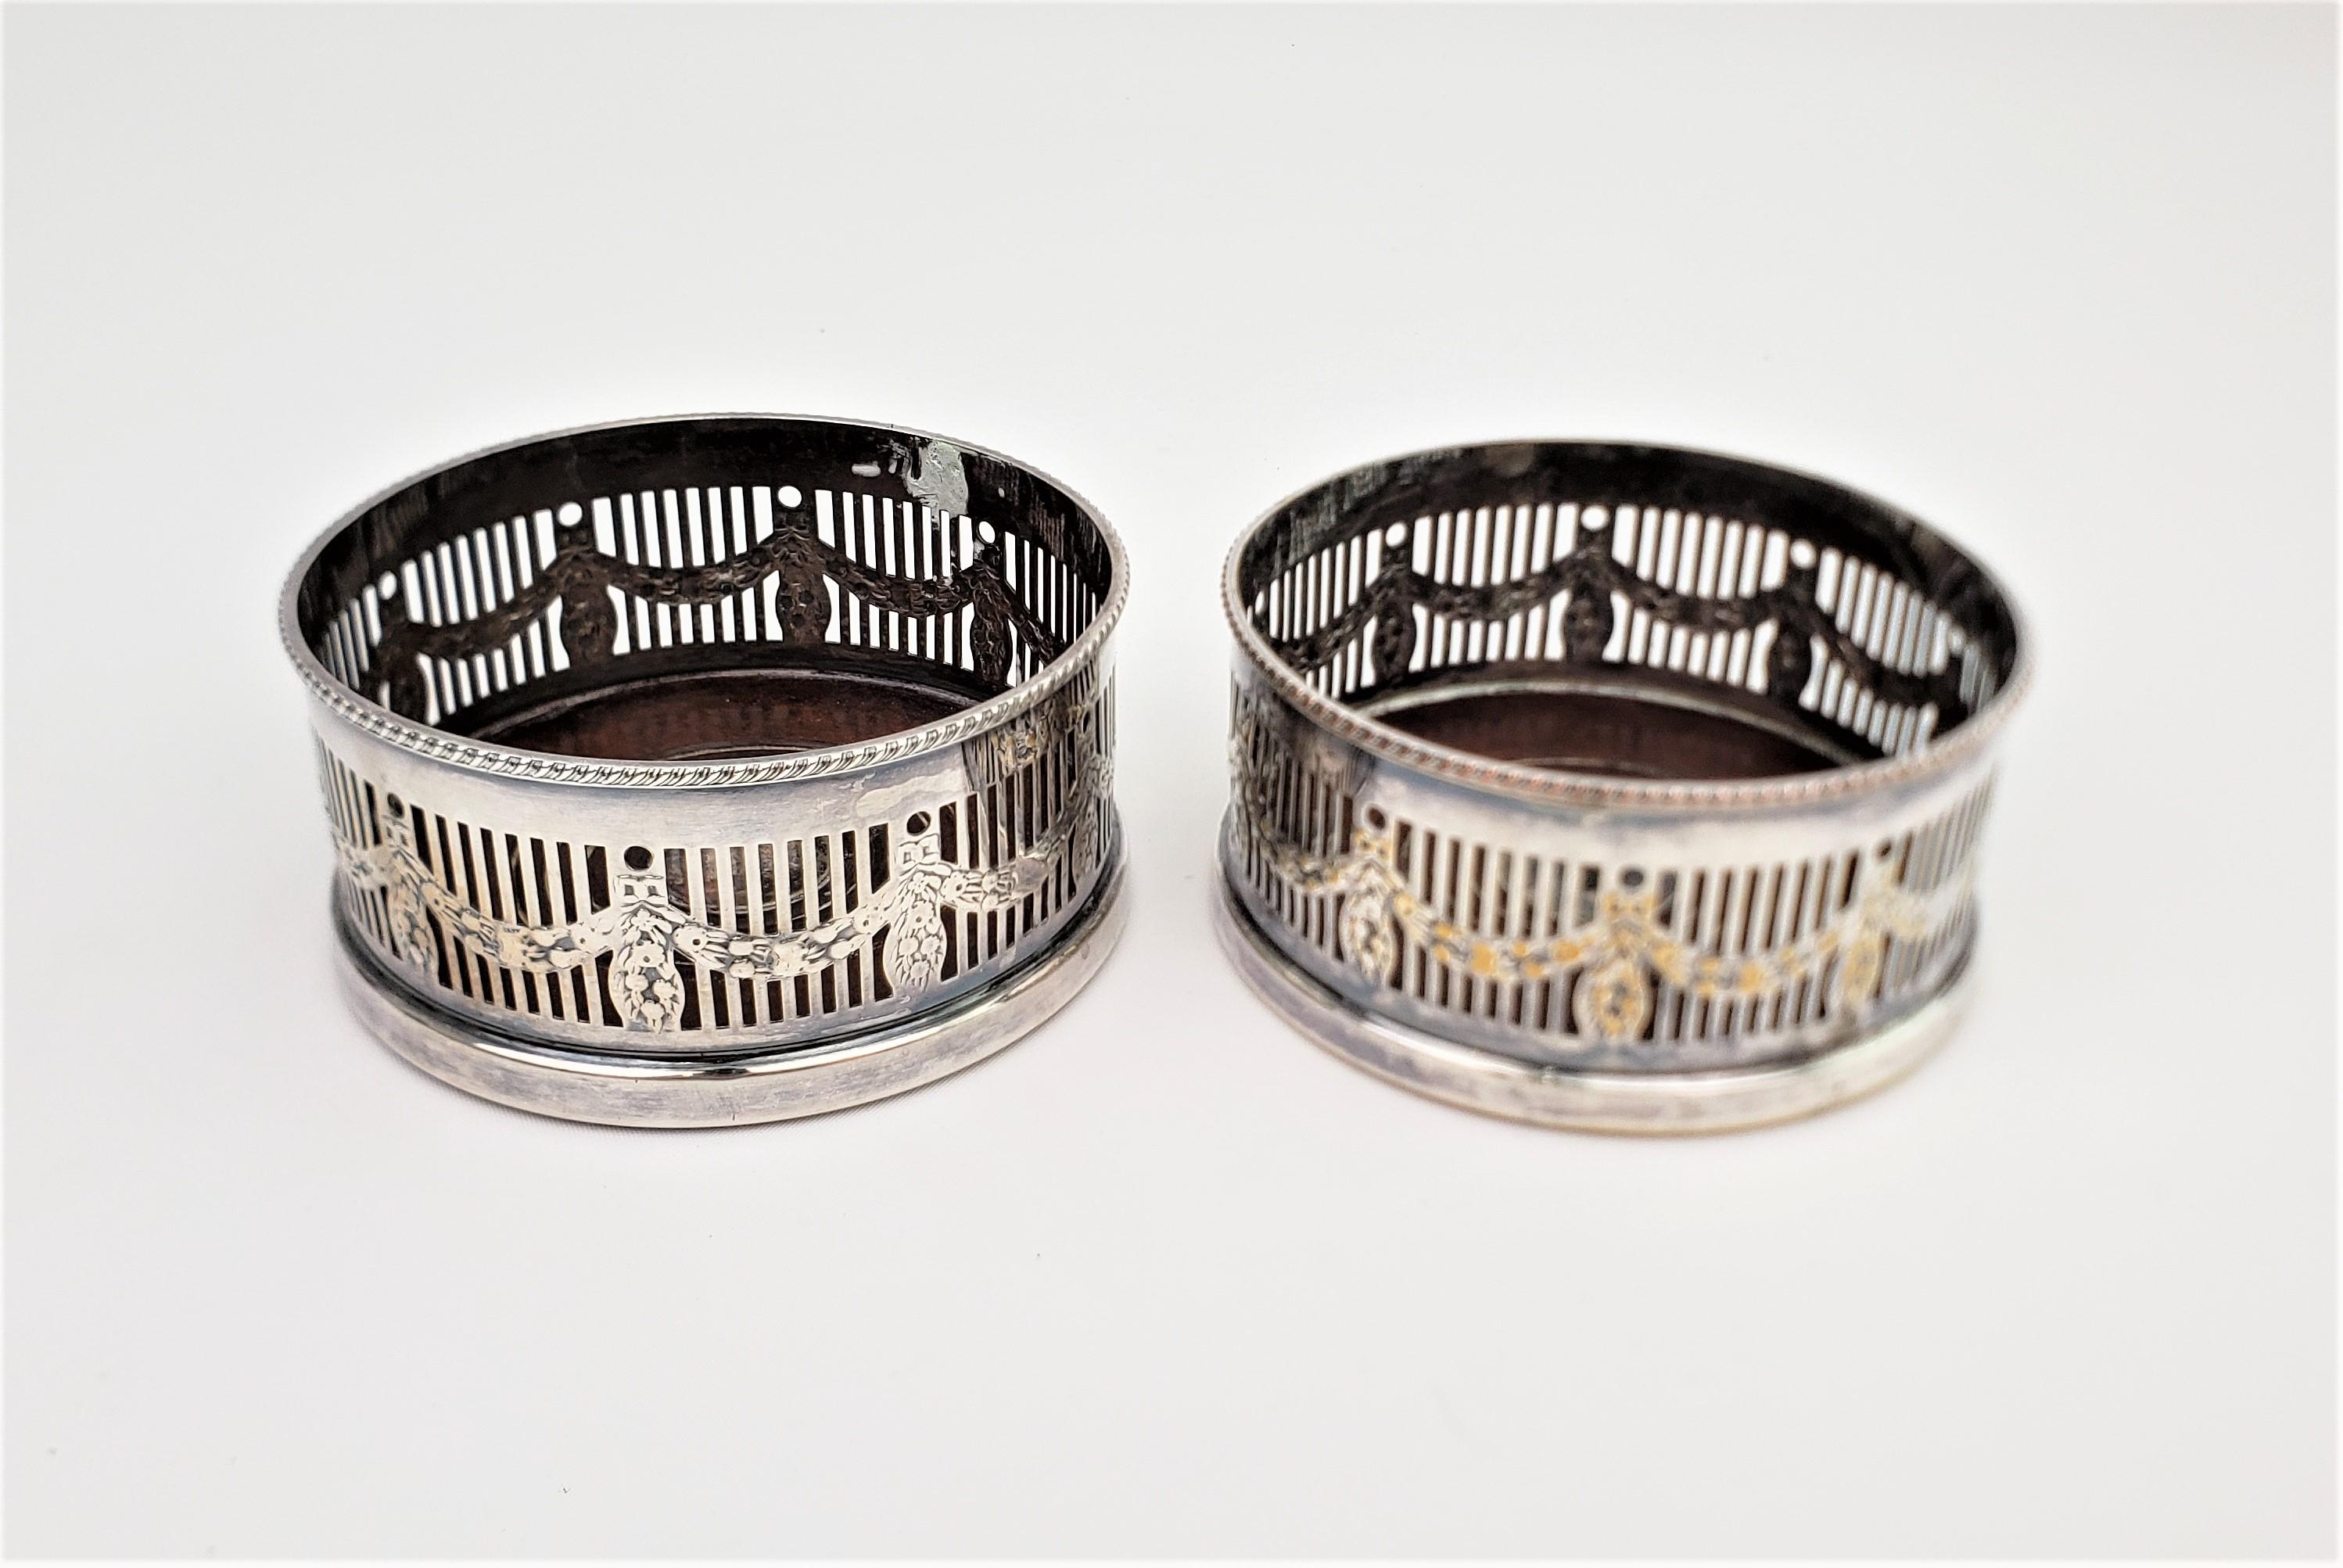 This pair of silver plated bottle coasters were made by Alpha Plate of Sheffield England in approximately 1920 in a slightly earlier Edwardian style. The bottle coasters have gallery surrounds with a garland and ribbon styled decoration and turned